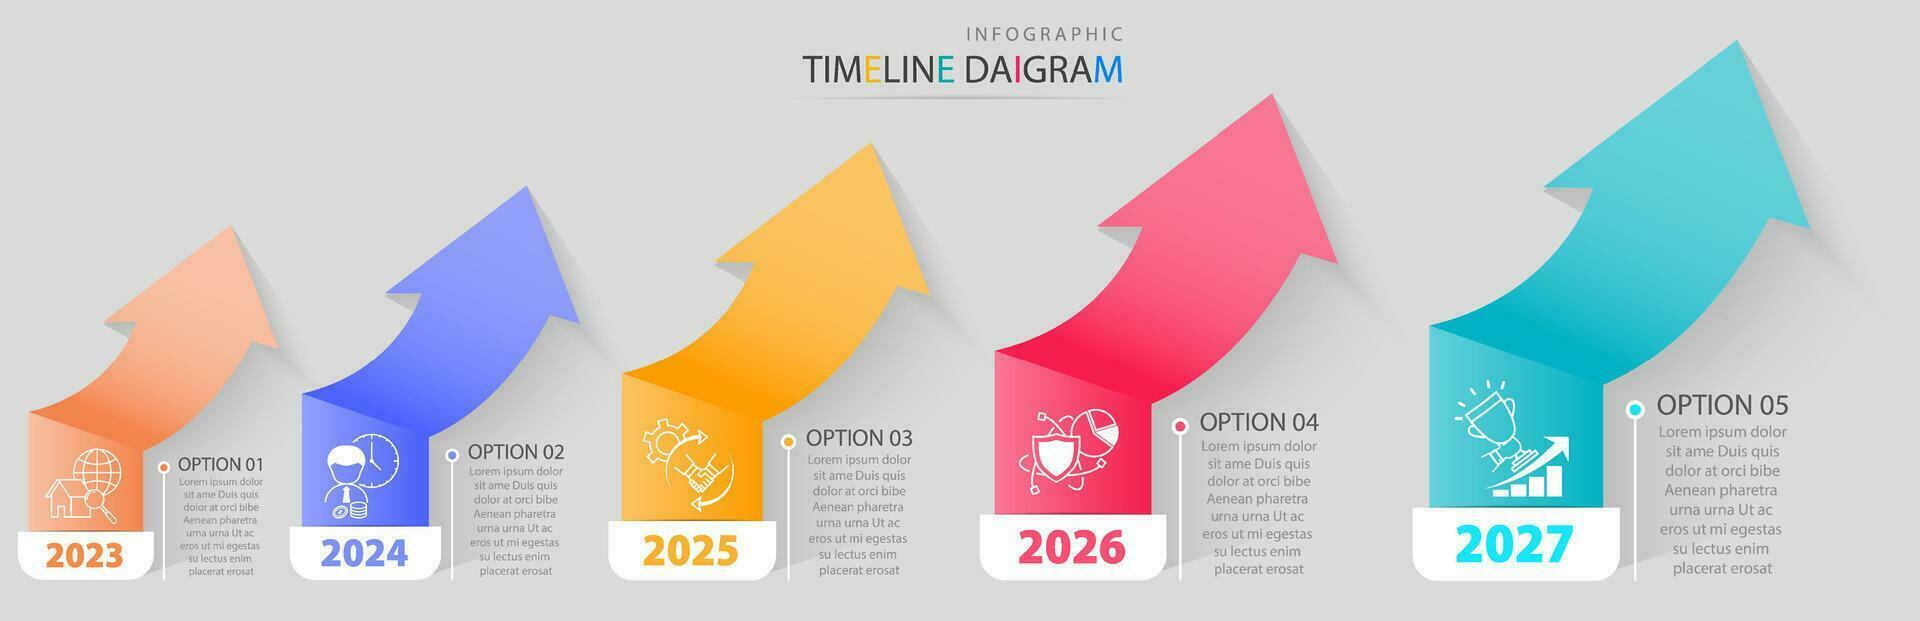 Timeline infographic template with 6 options for display business data and statistics vector